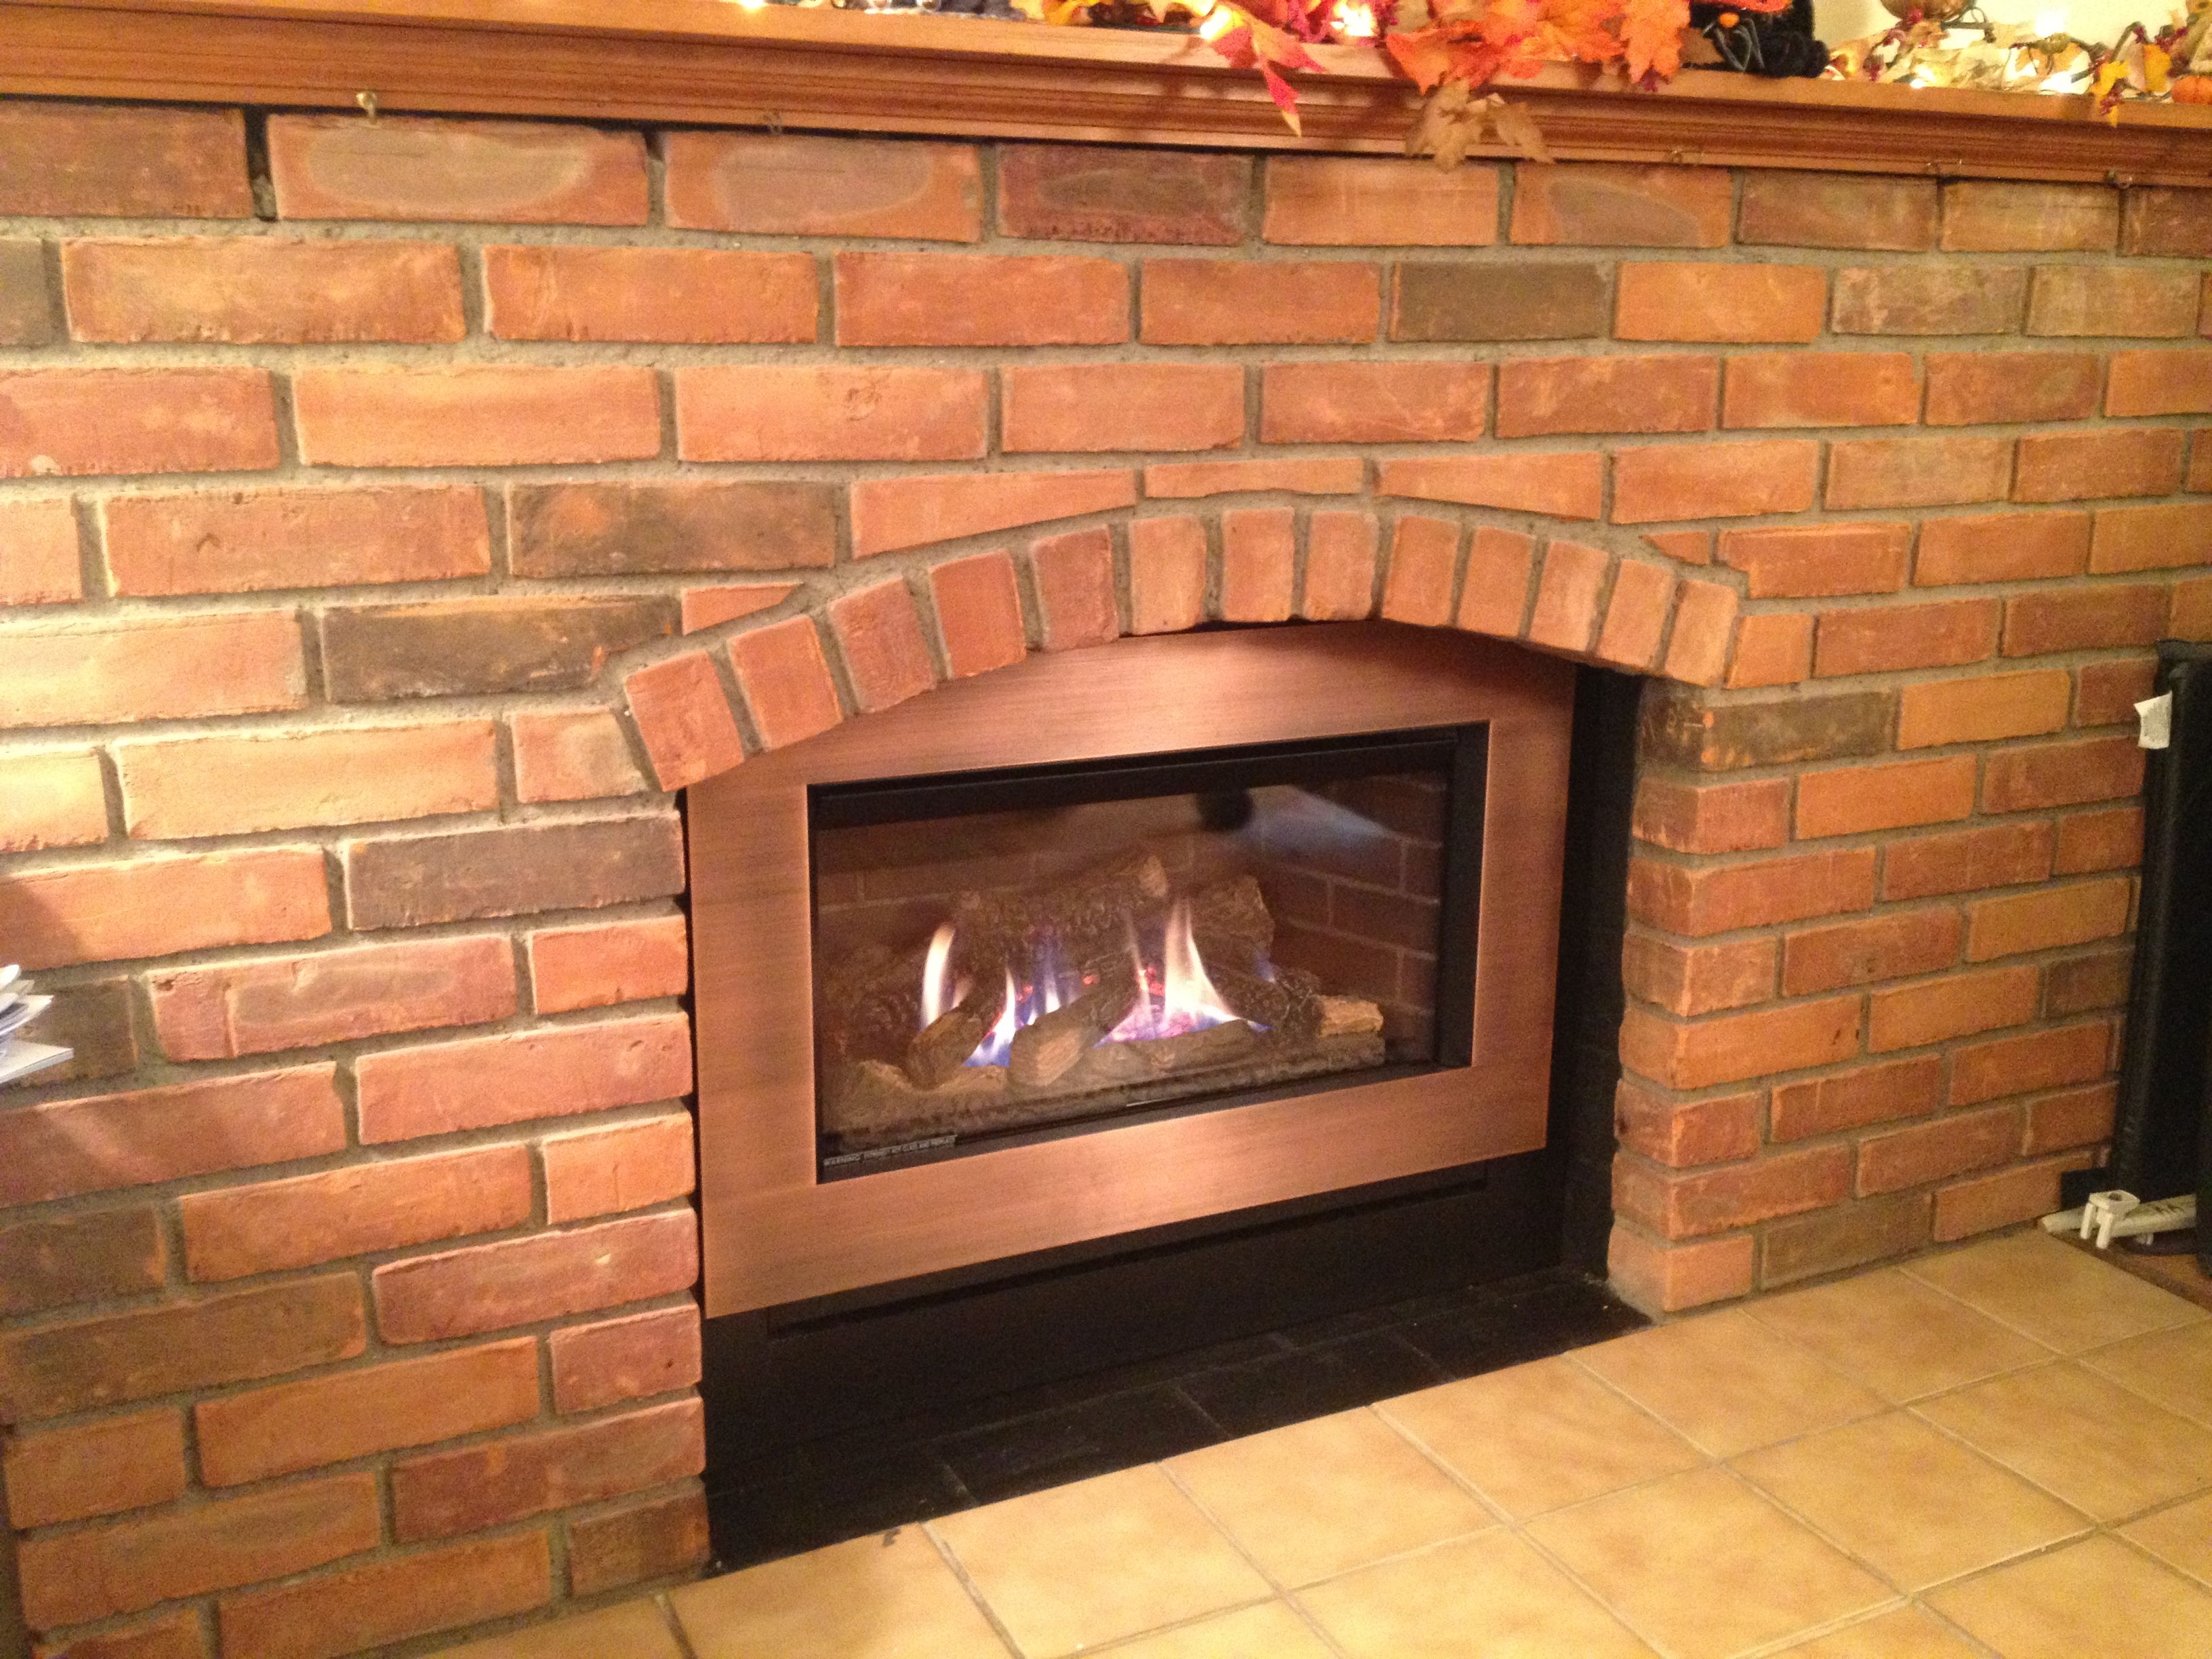 Fireplaces for Sale Unique Pin On Valor Radiant Gas Fireplaces Midwest Dealer